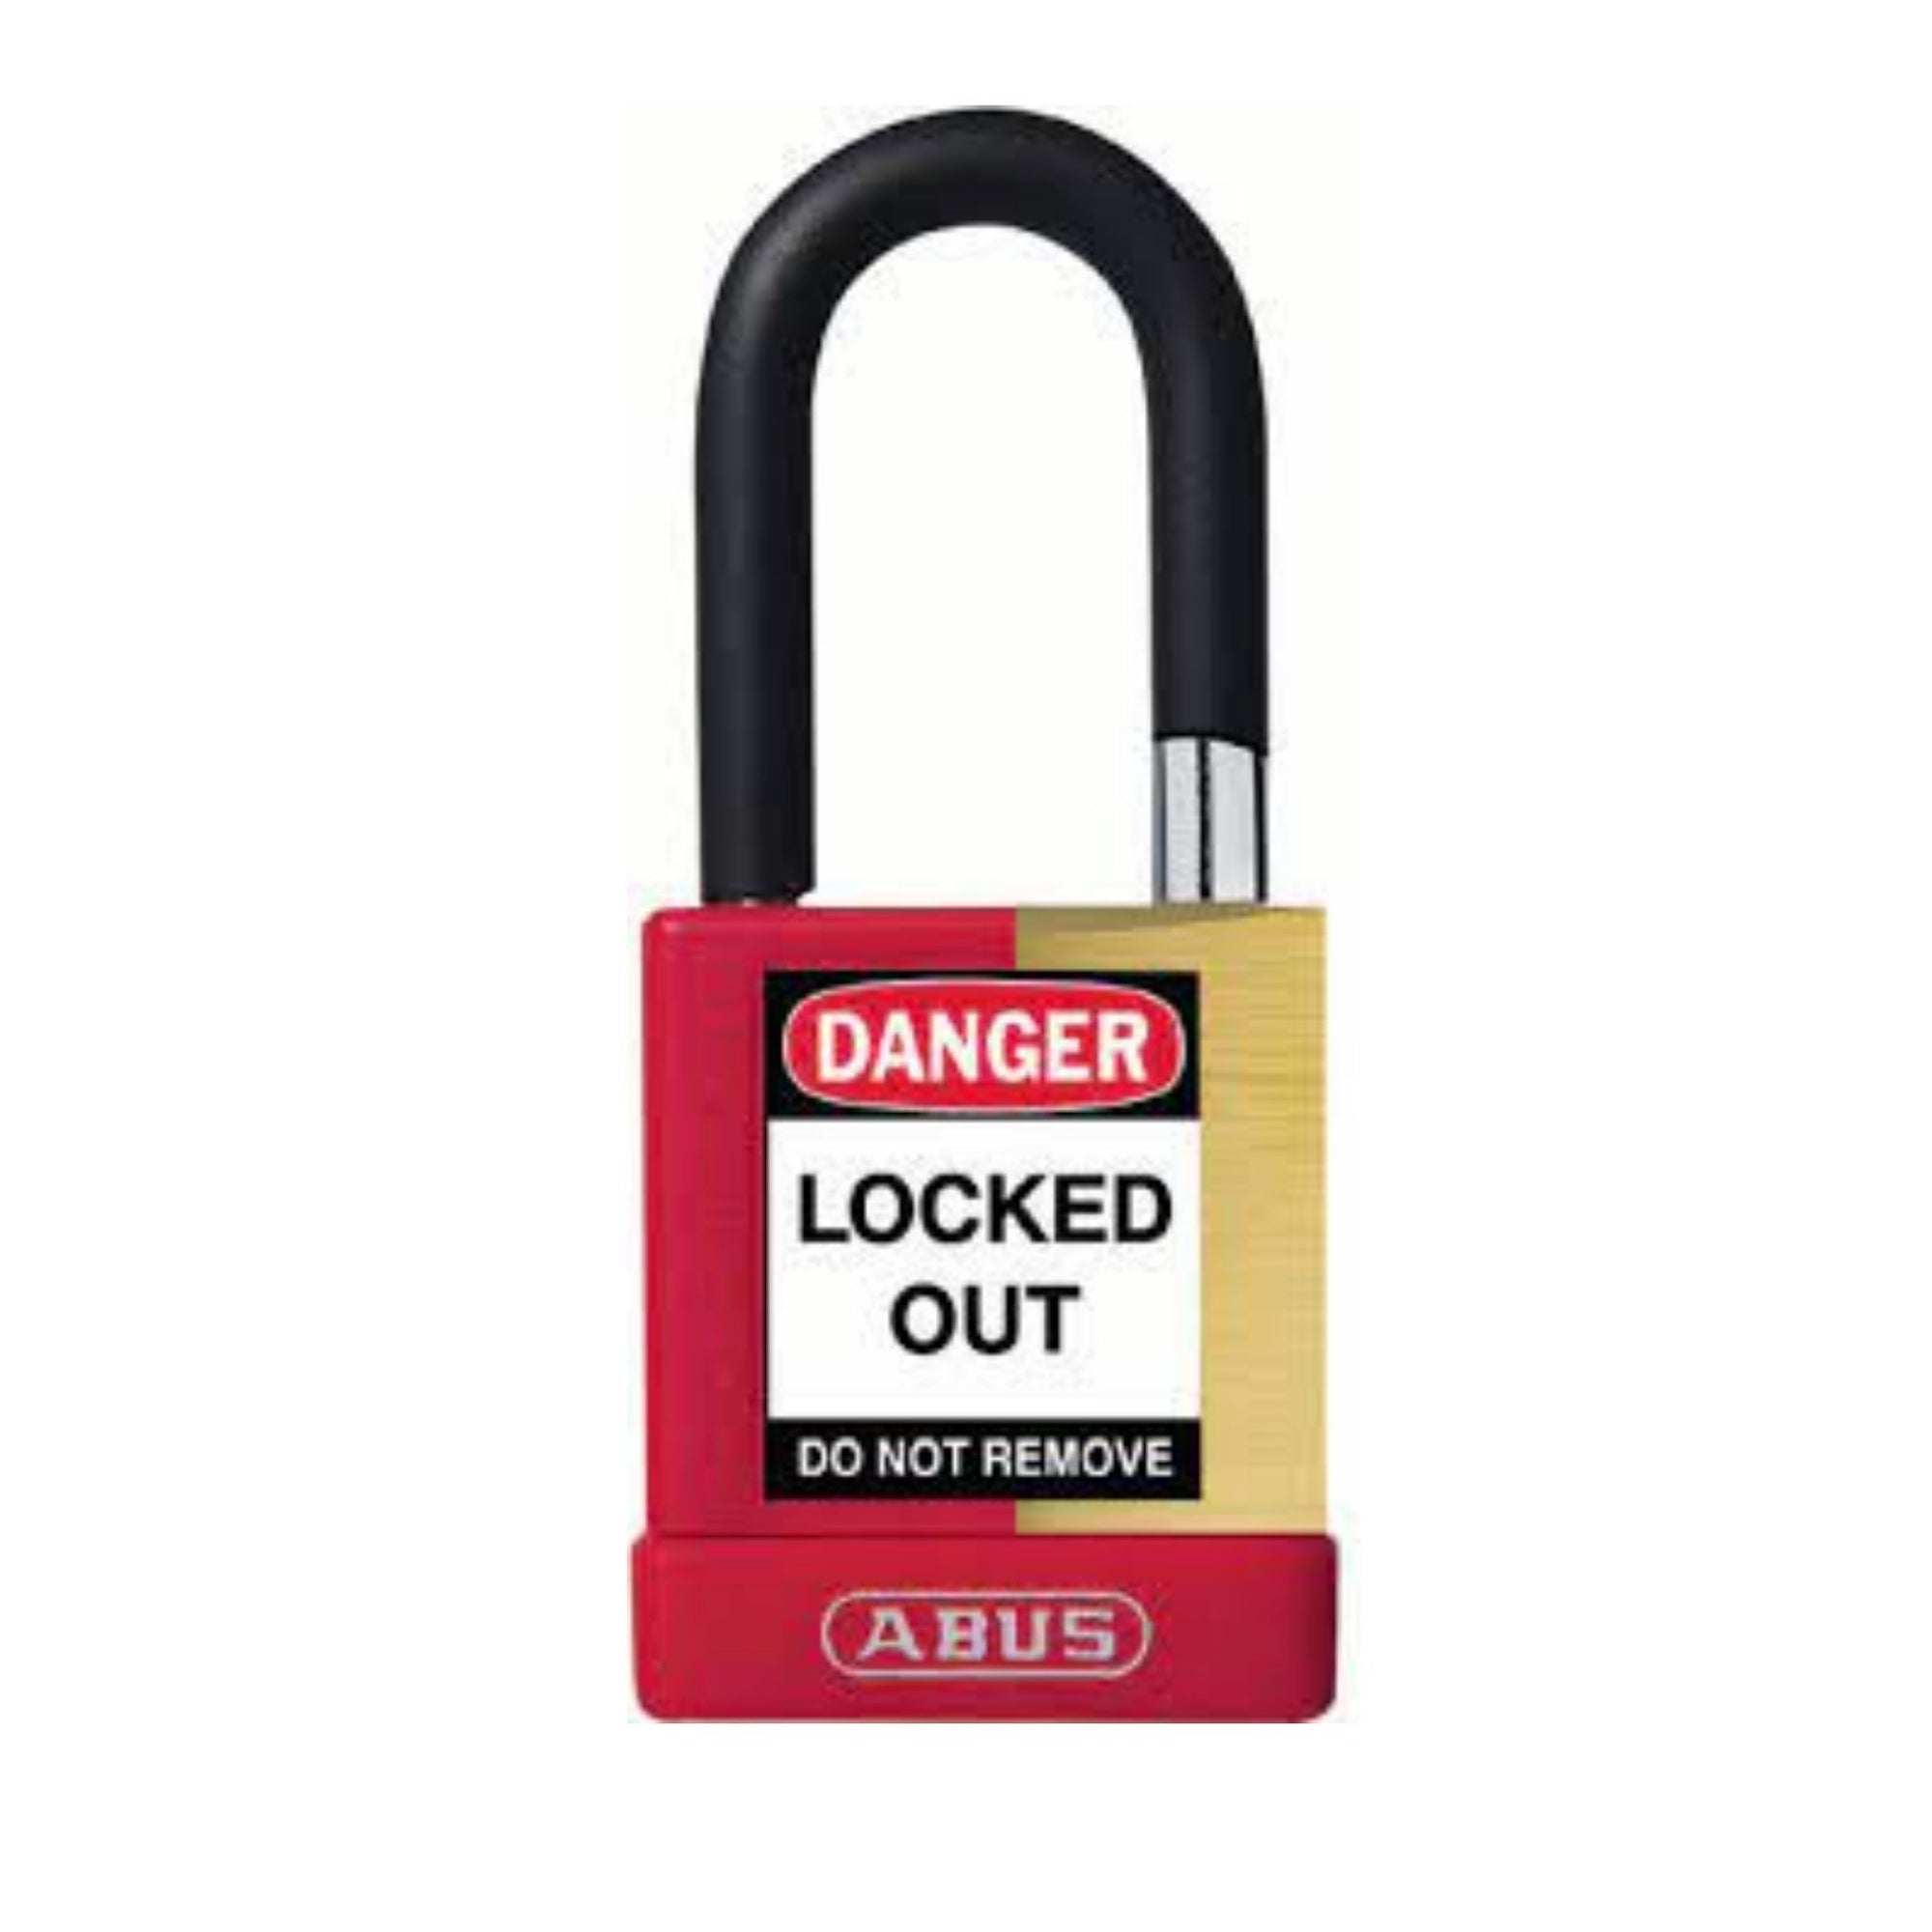 Abus 74M/40 MK Red Insulated Brass Safety Padlock with 1-1/2" Shackle - The Lock Source